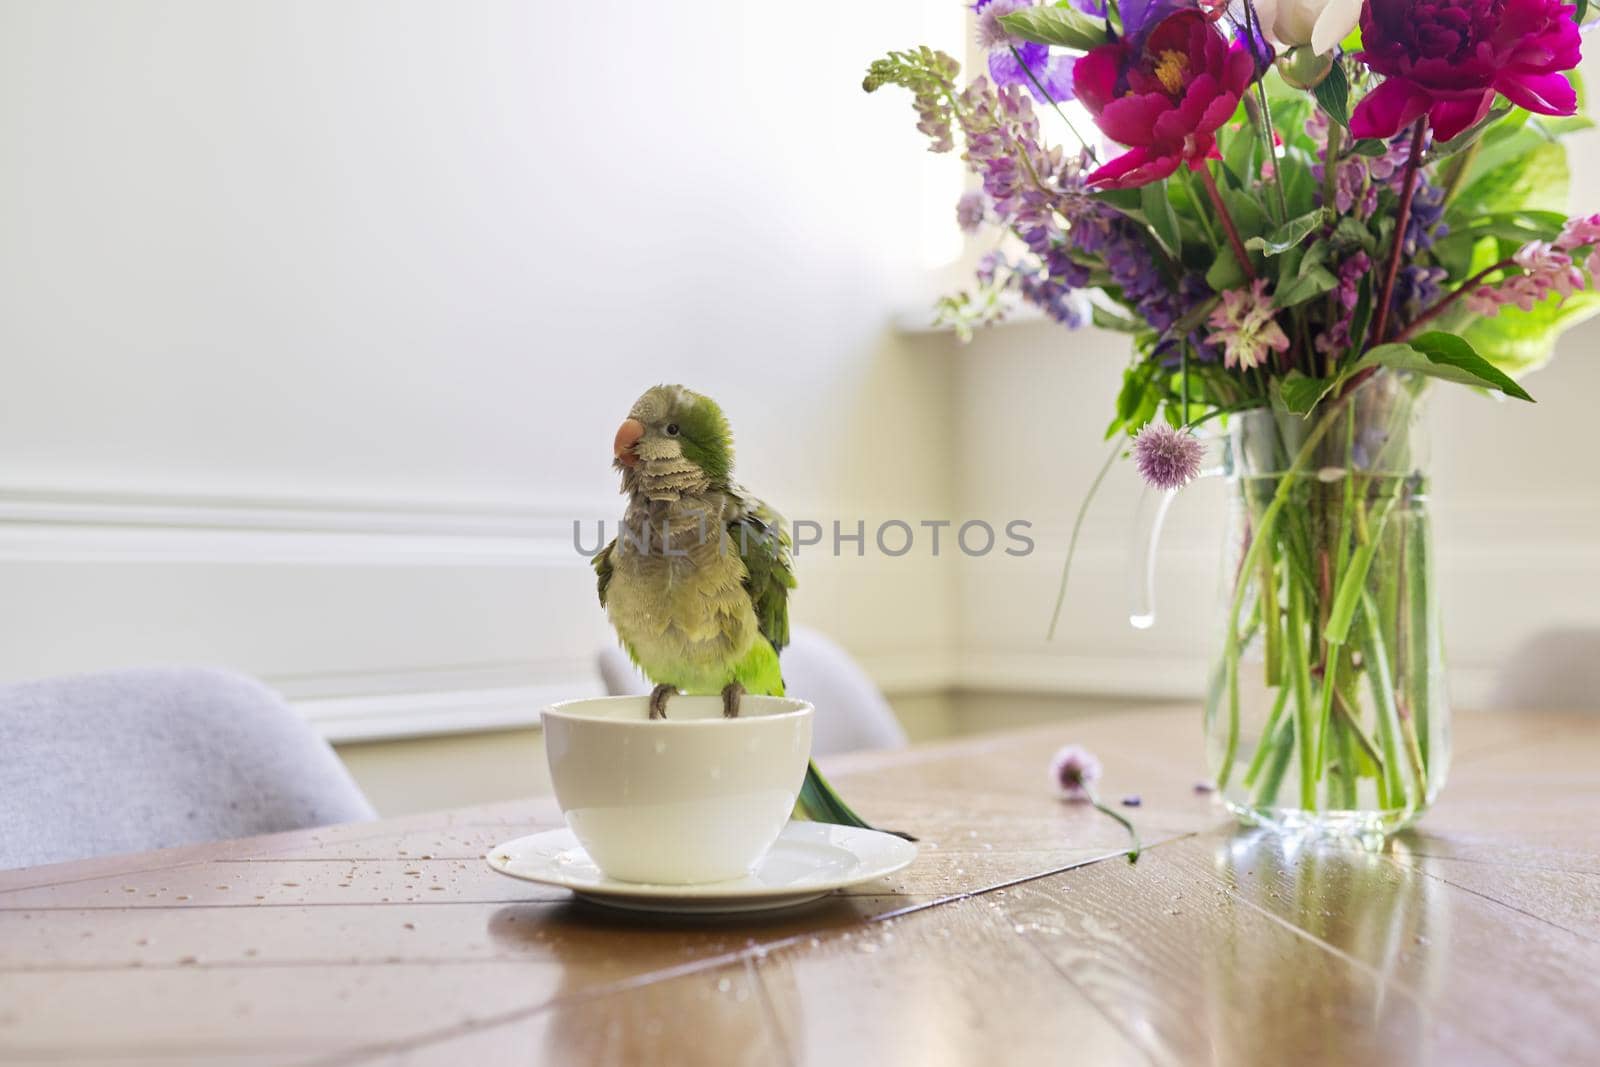 Wet green parrot bathing in cup, bird enjoying bath, pet quaker parrot on the table on cup with water